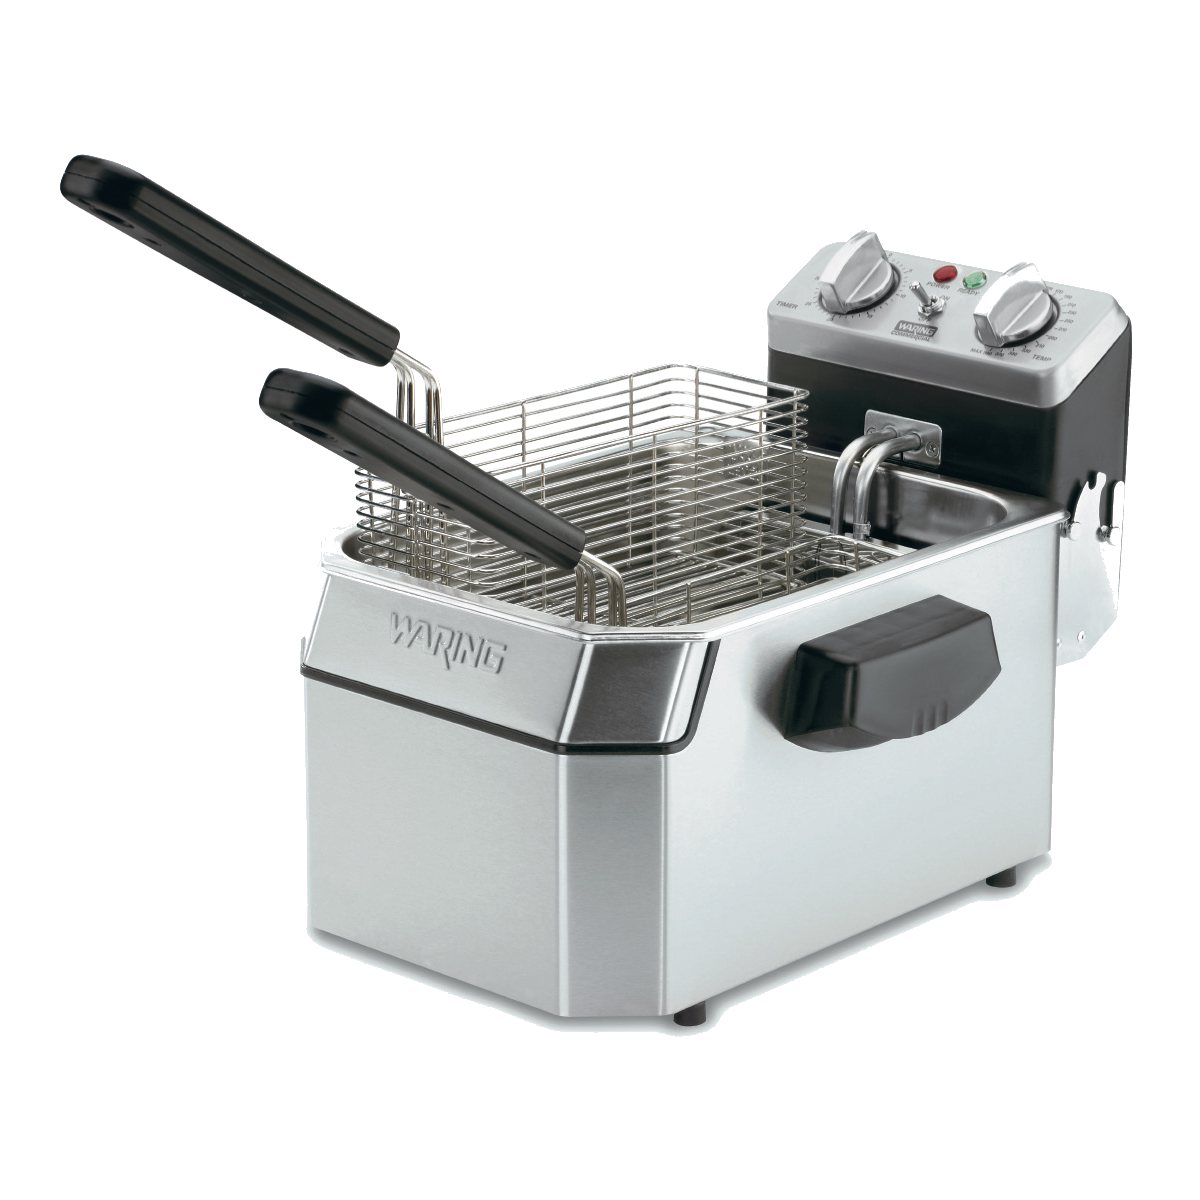 https://www.waringcommercialproducts.com/files/products/wdf1000-1000b-waring-deep-fryer-main.png